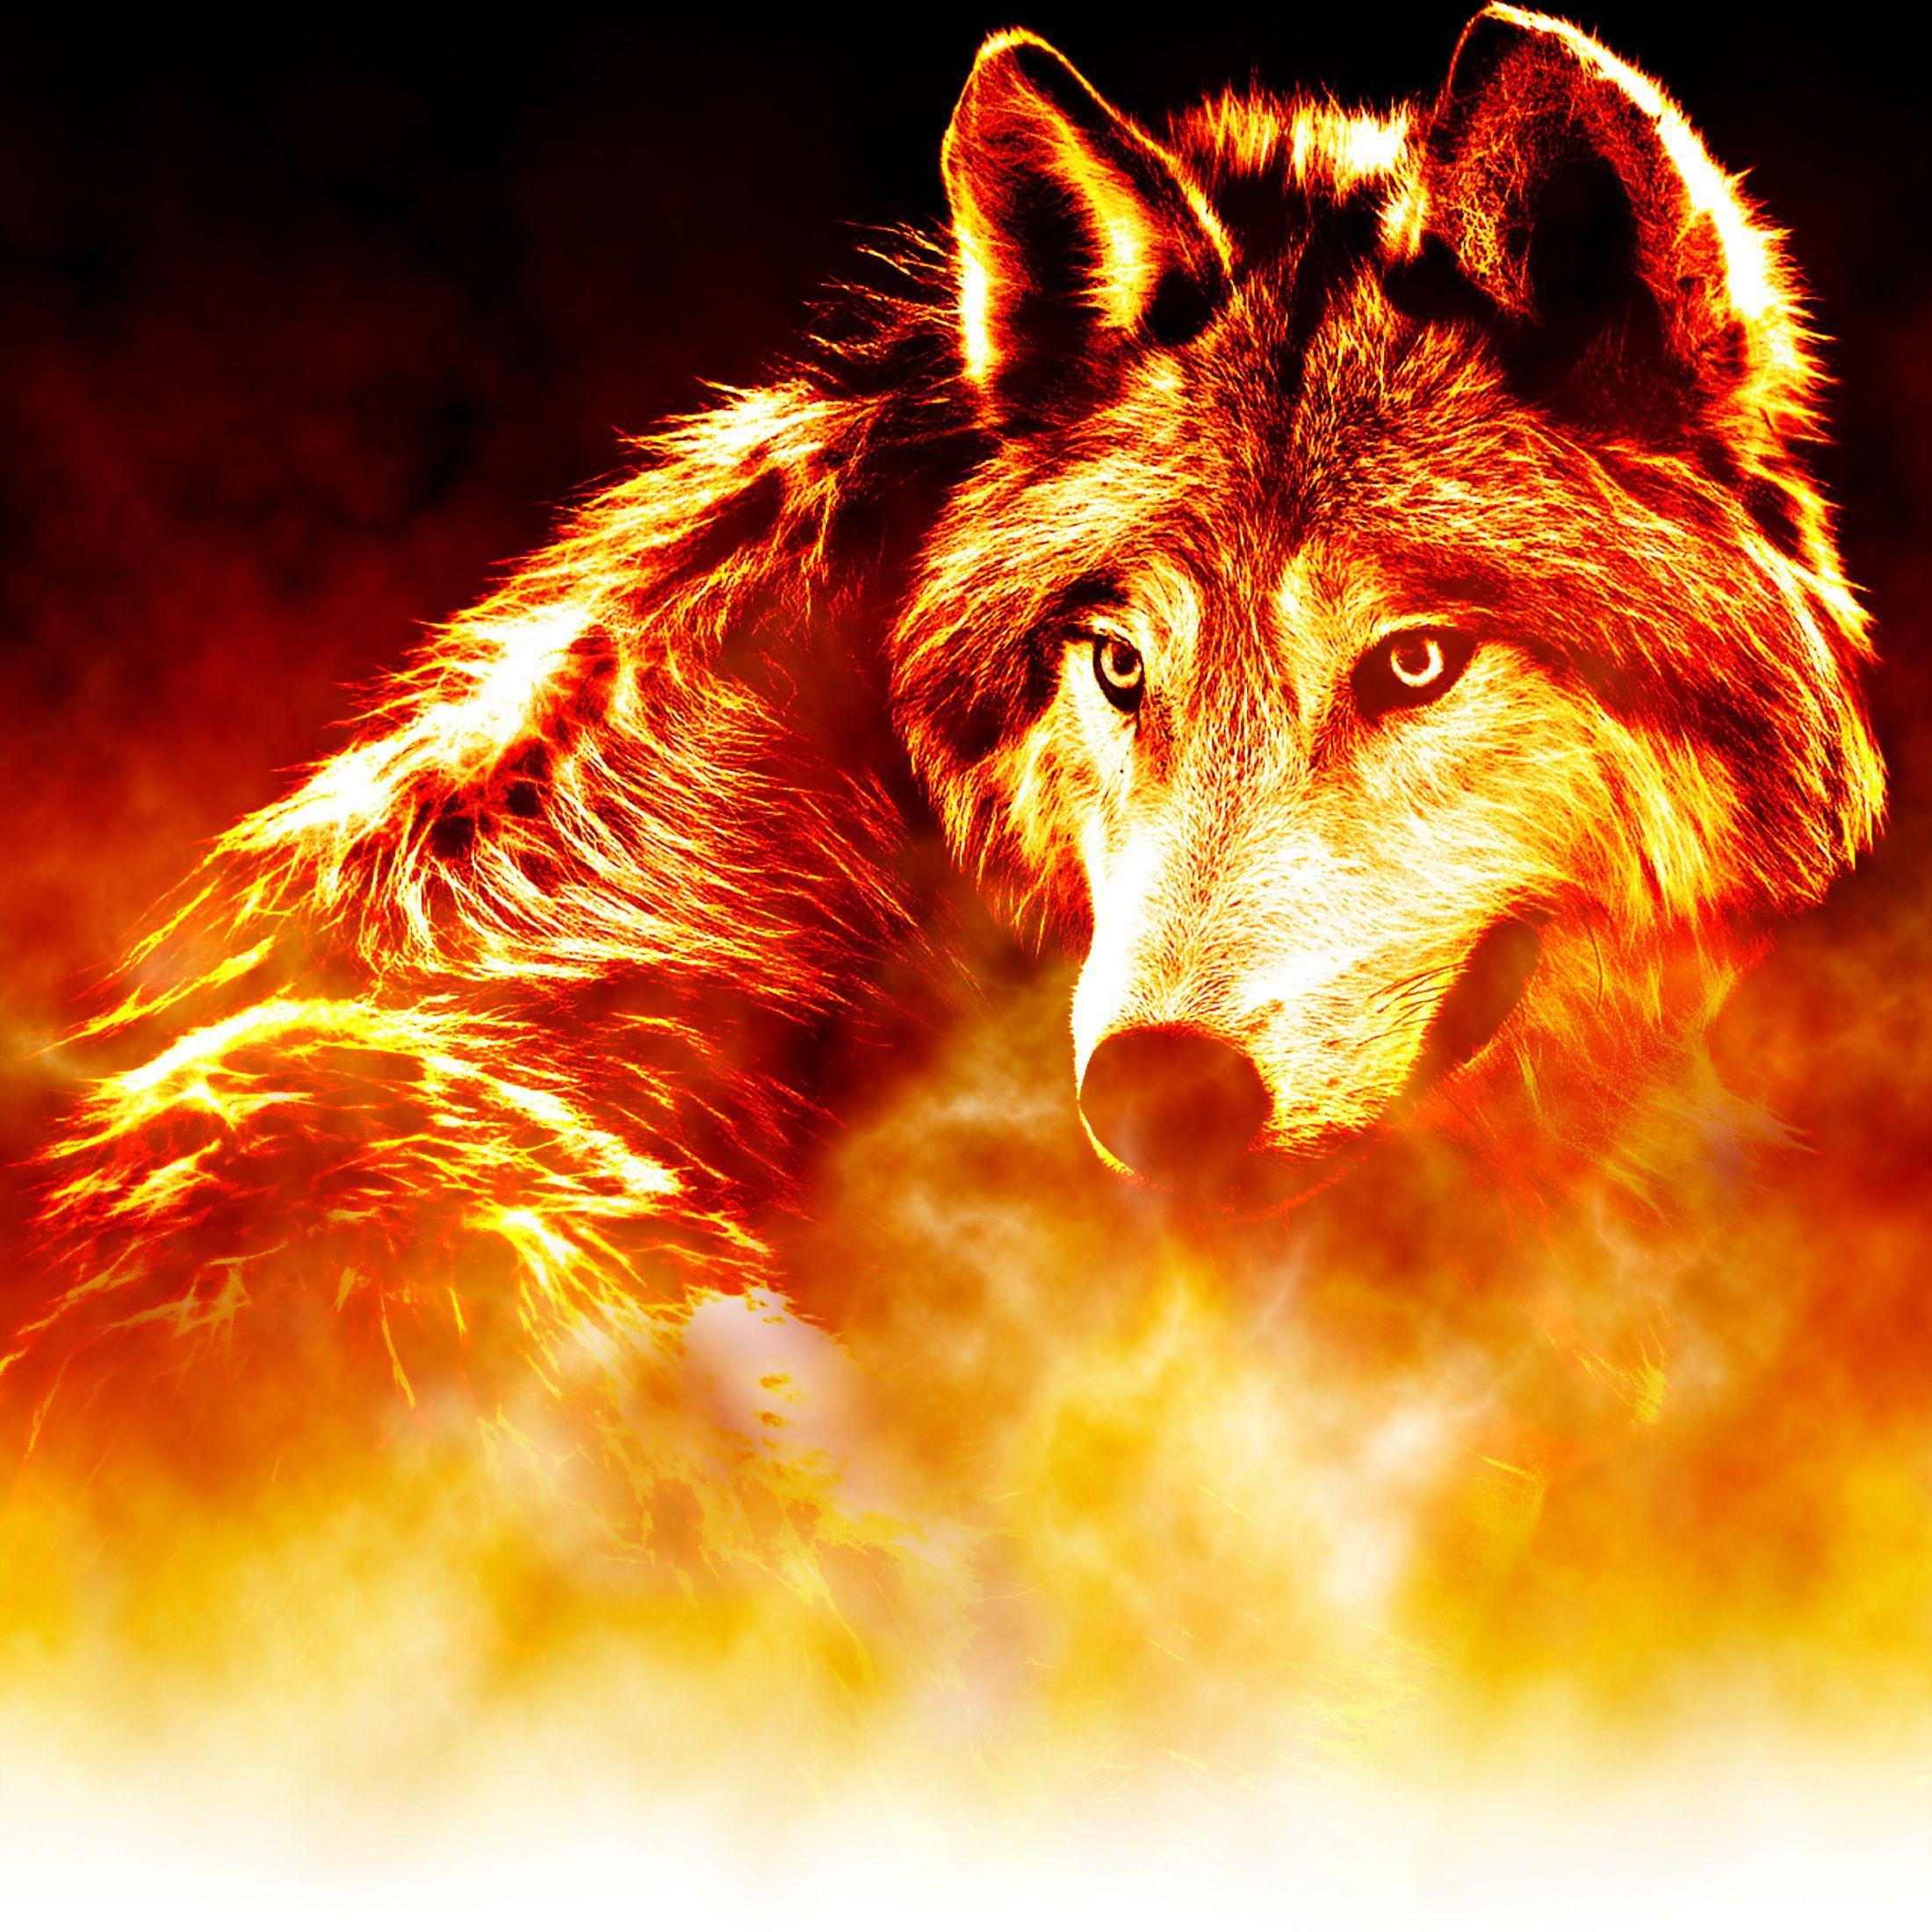 Cool Fire Wolf Wallpapers - Top Free